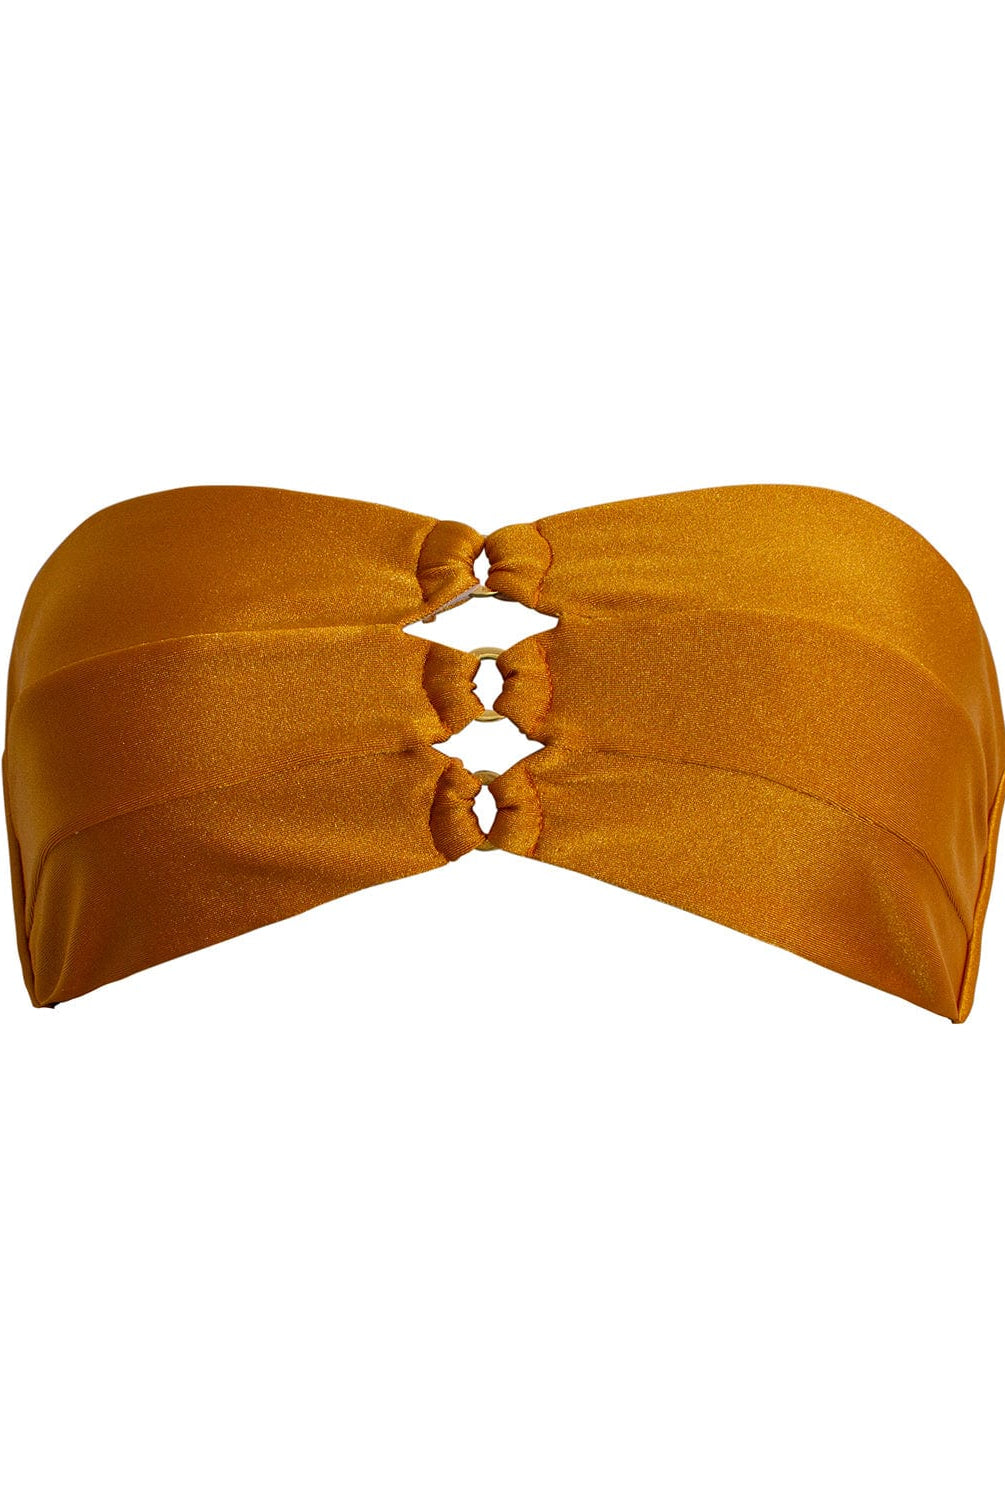 An orange bandeau bikini top with gold details. Featured against a white wall background.